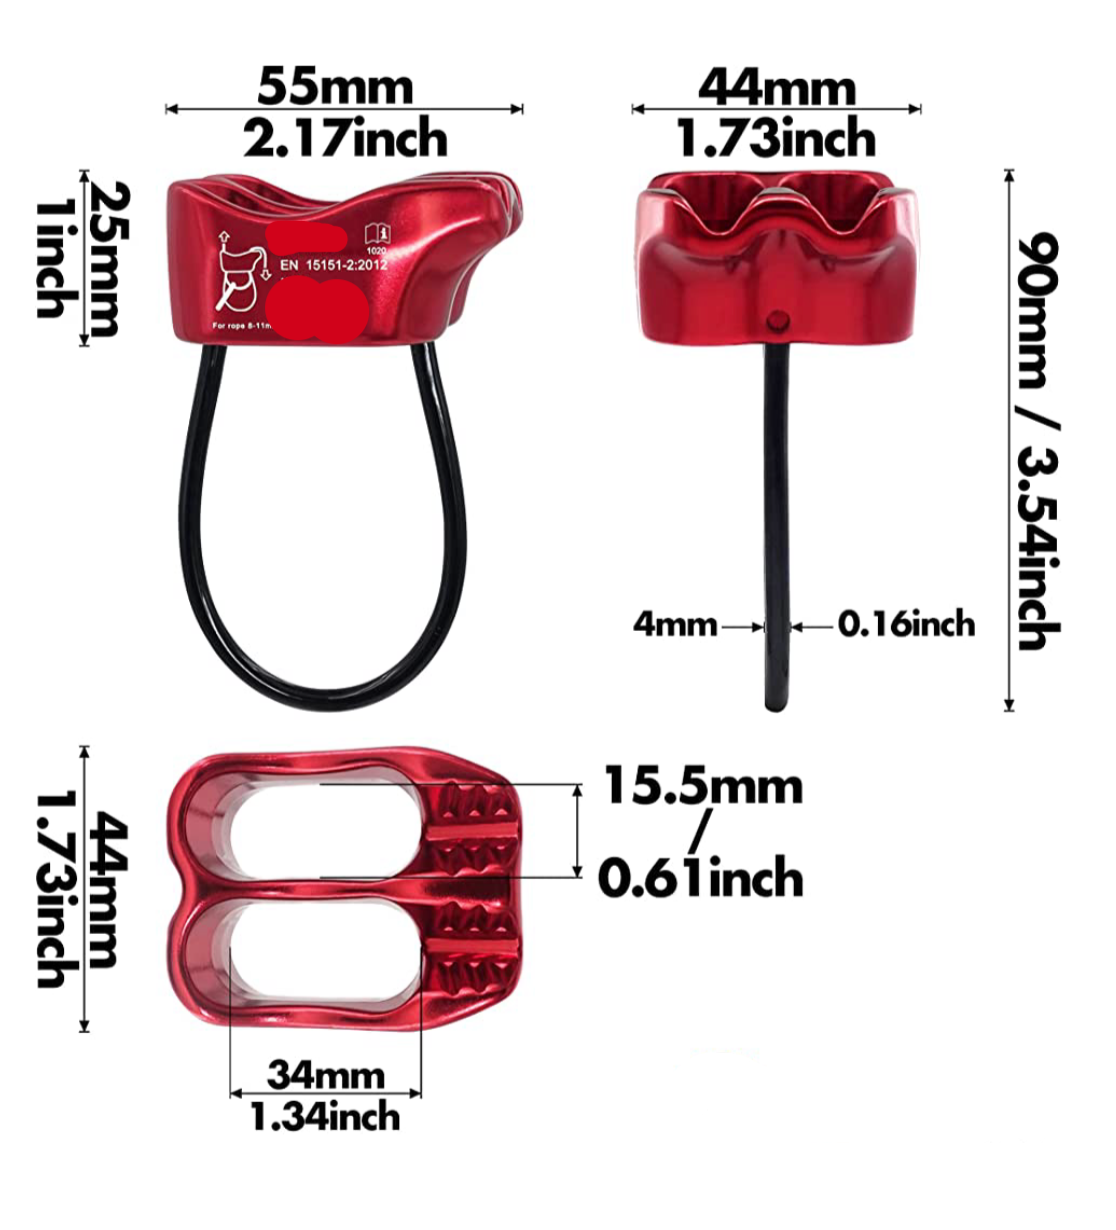 CLIMBING Tubular V-grooved Belay Device Package with Screw Locking Carabiner